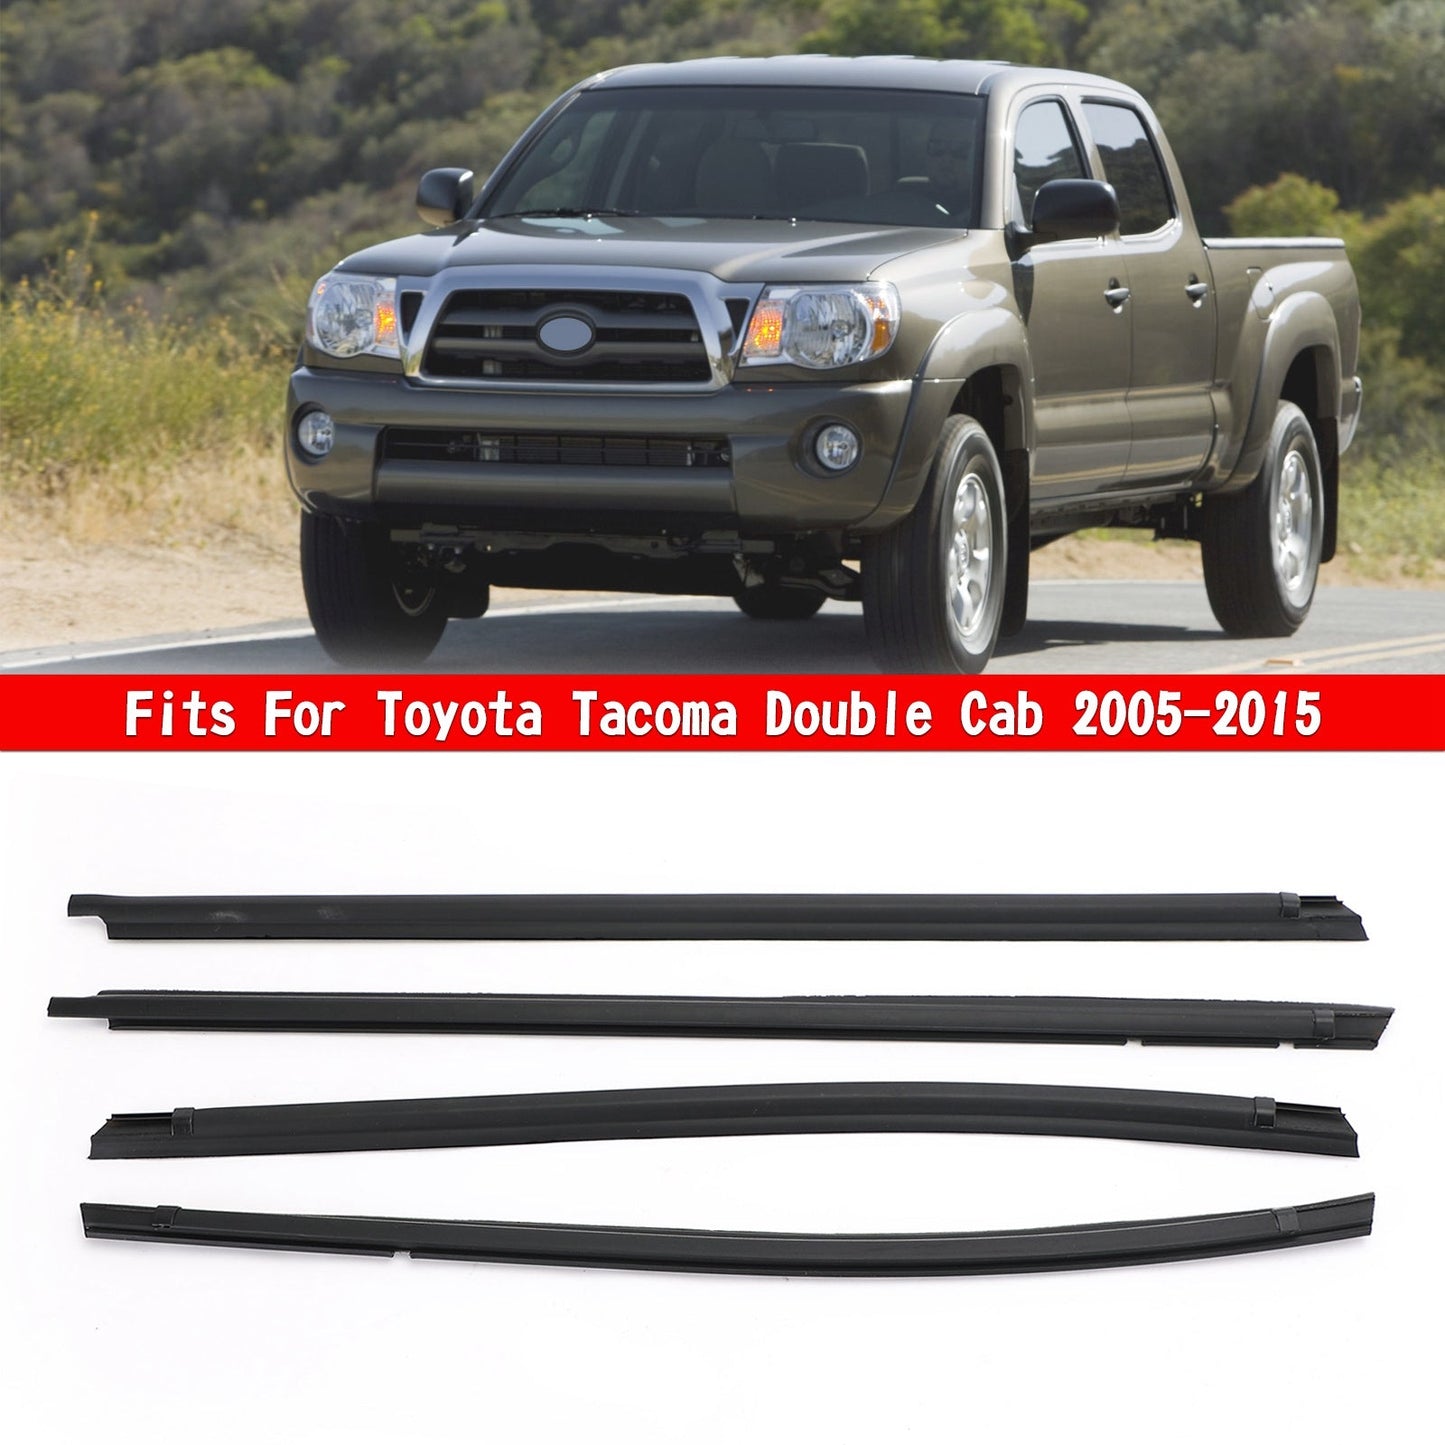 Car Outside Window Weatherstrip Seal Belt Moulding For Tacoma Double Cab 05-2015